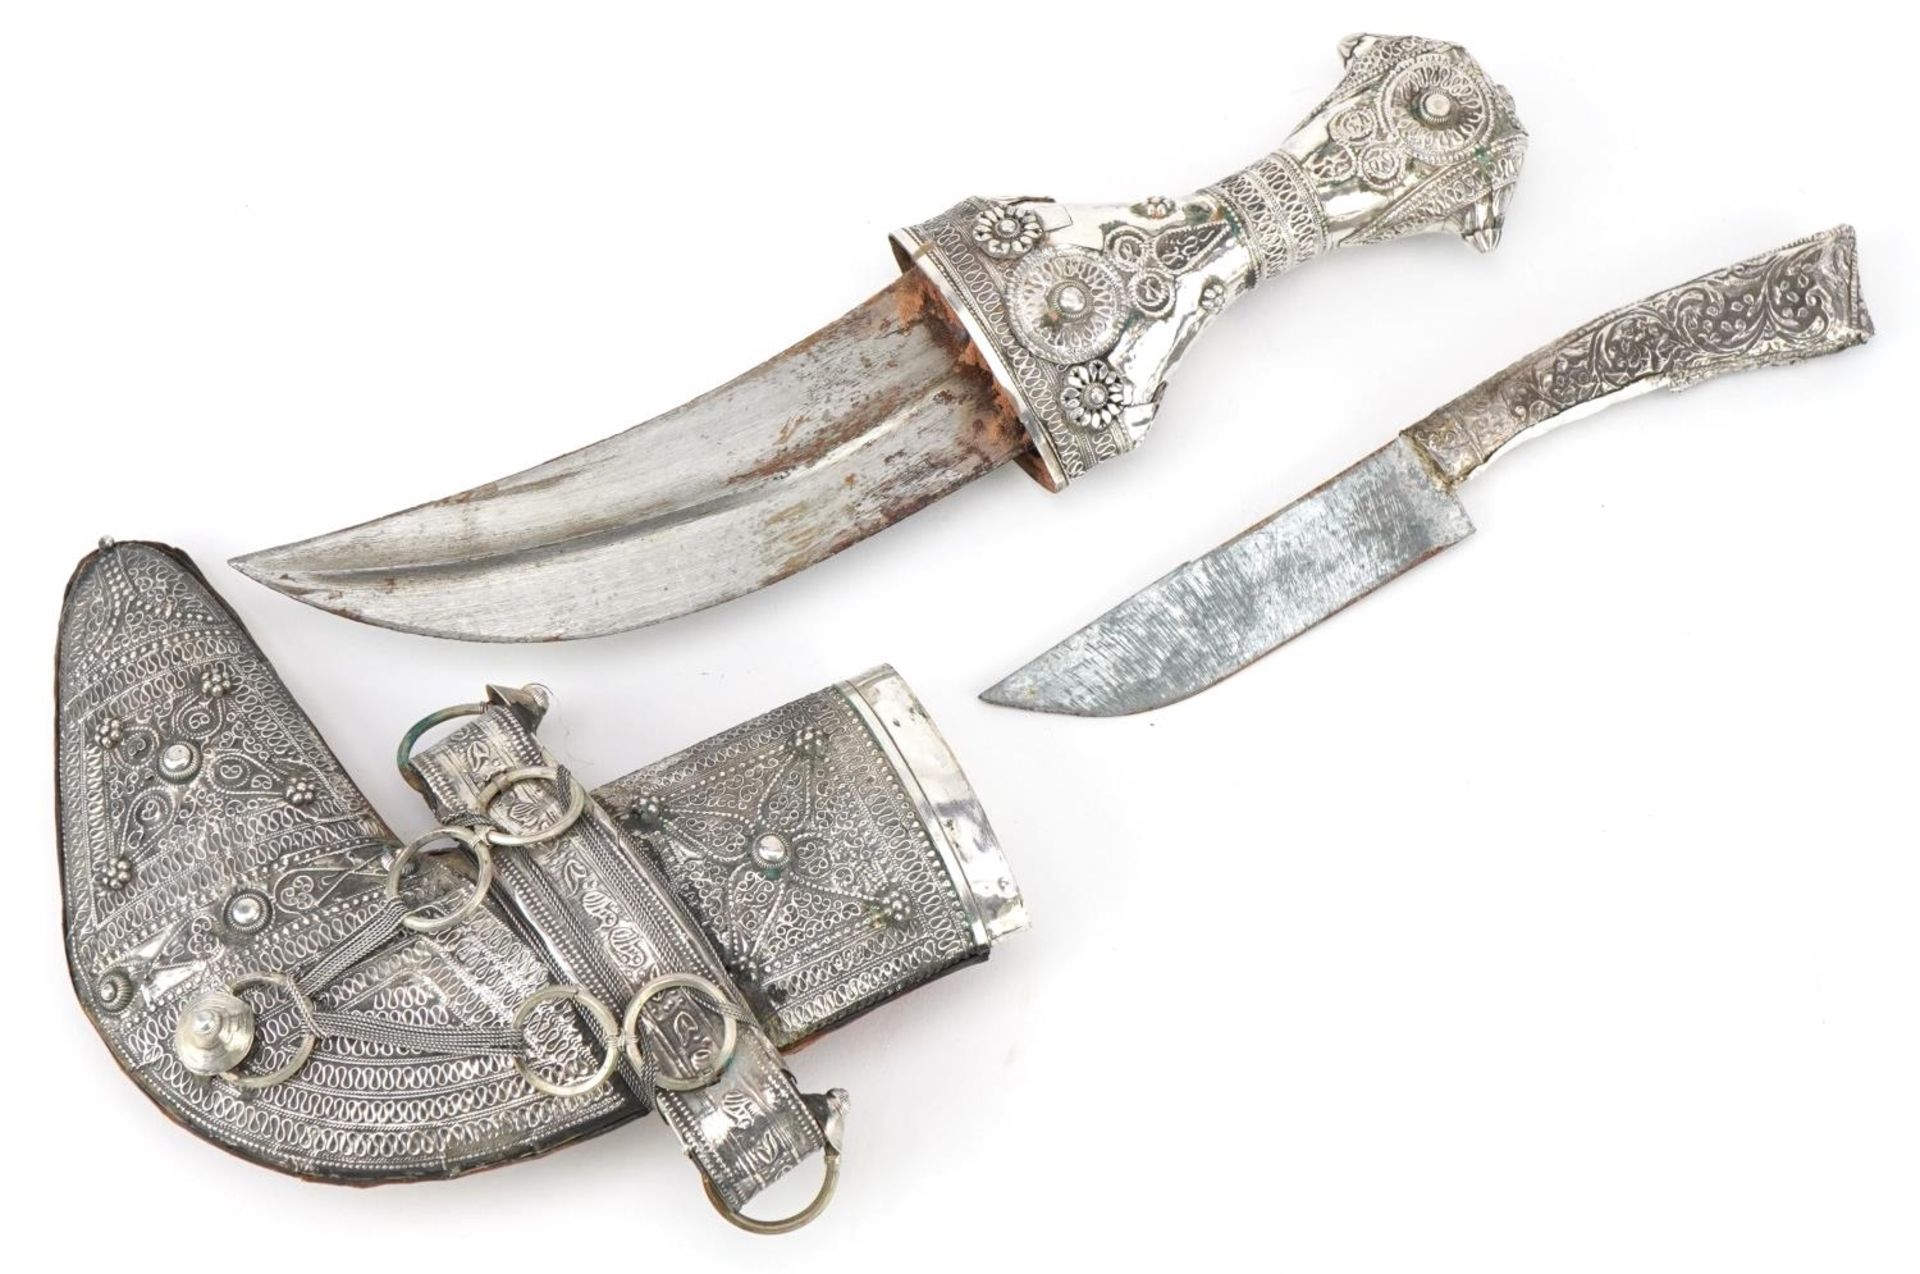 Omani unmarked silver jambiya dagger with steel blade and silver handled knife, 26cm in length